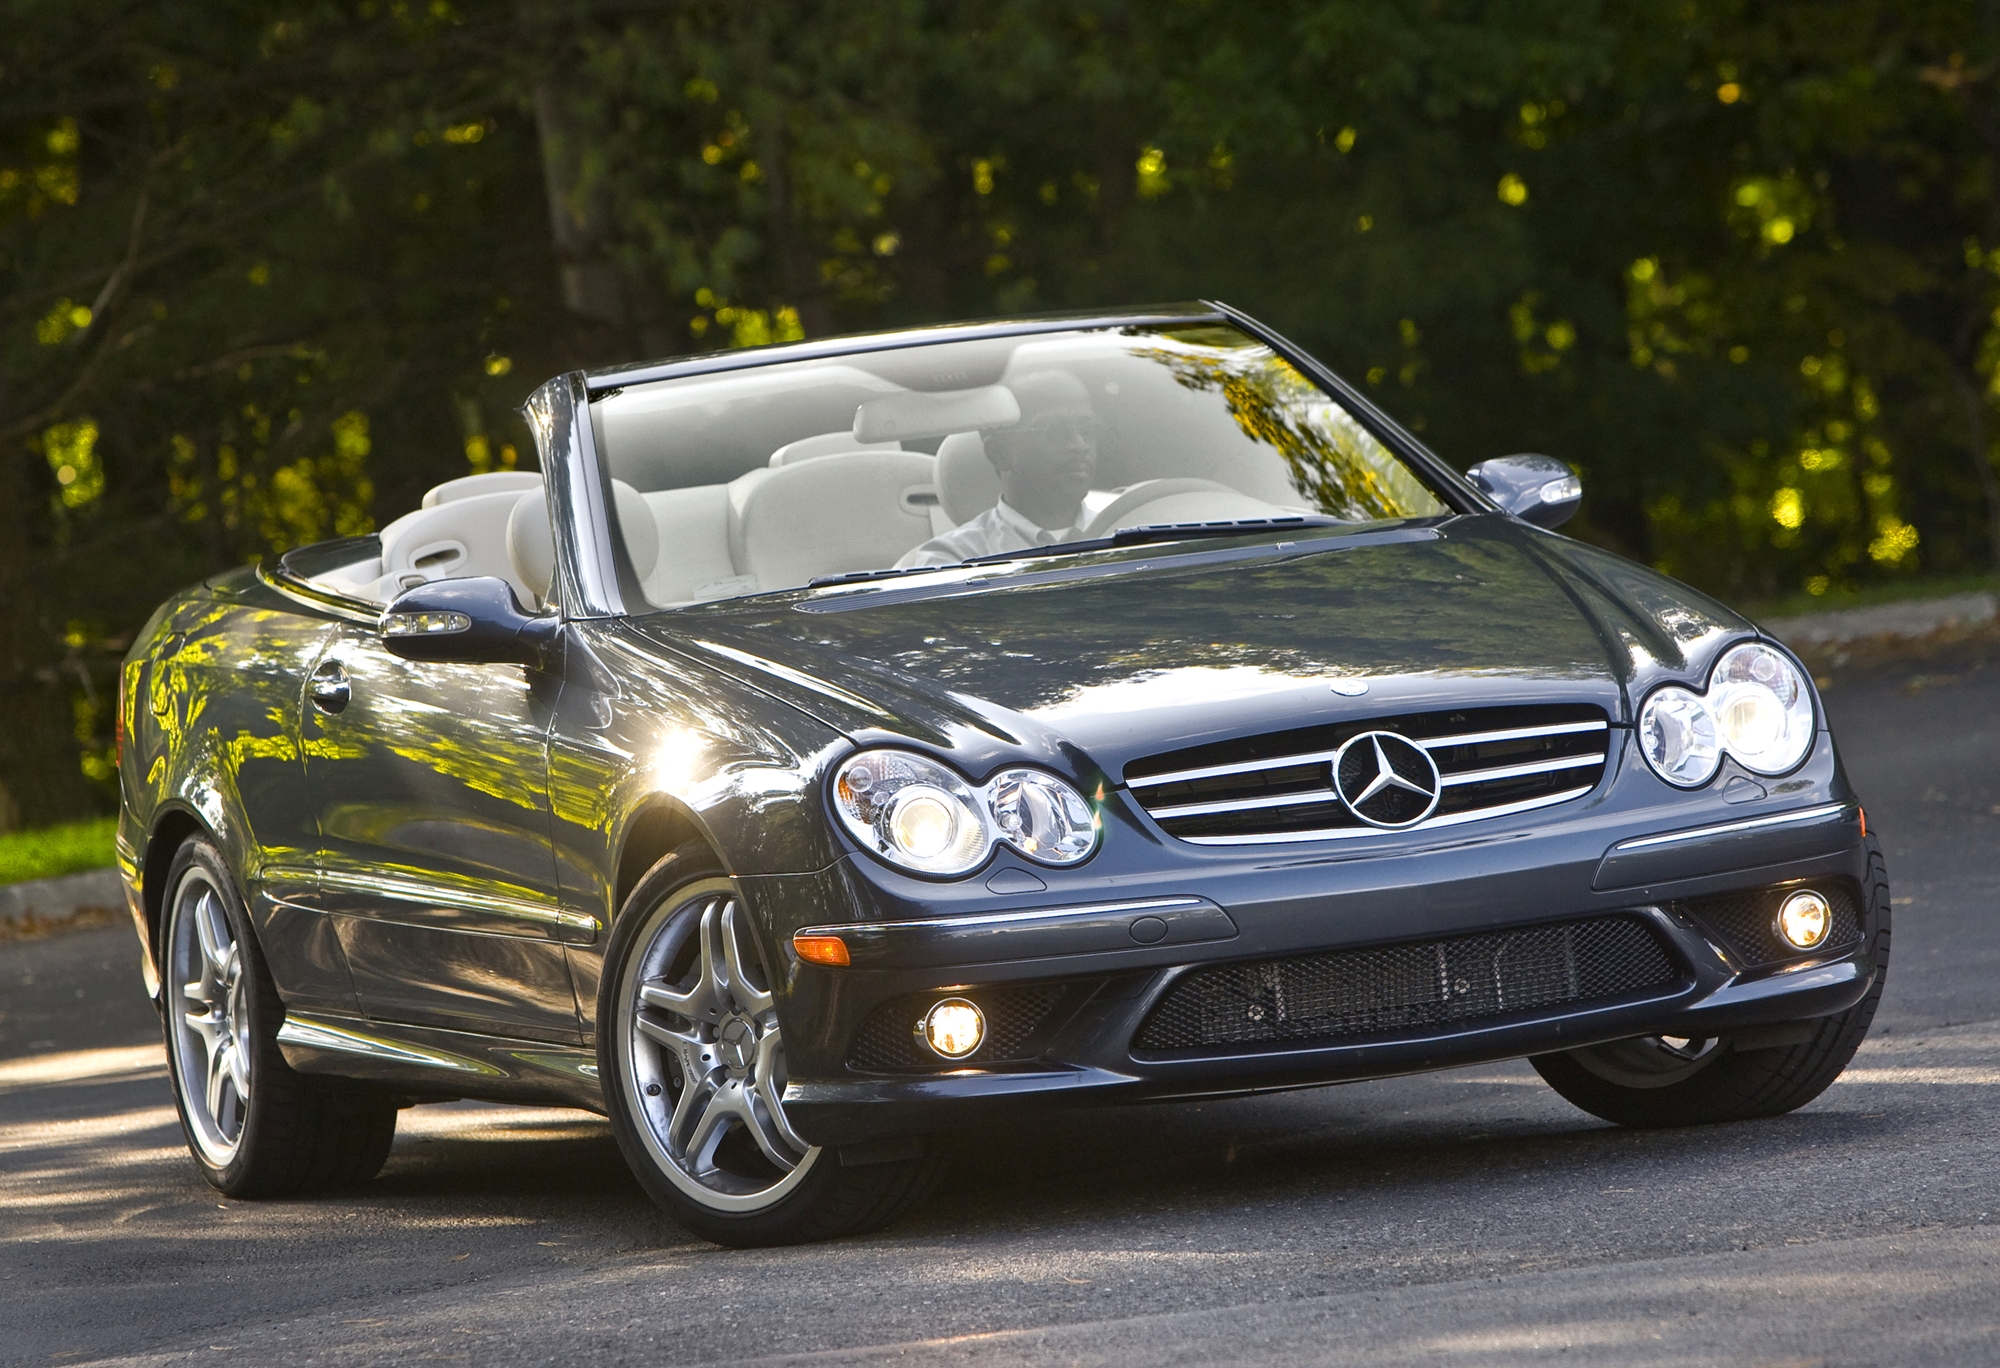 2009 Mercedes-Benz CLK 350 Cabriolet Full Specs, Features and Price